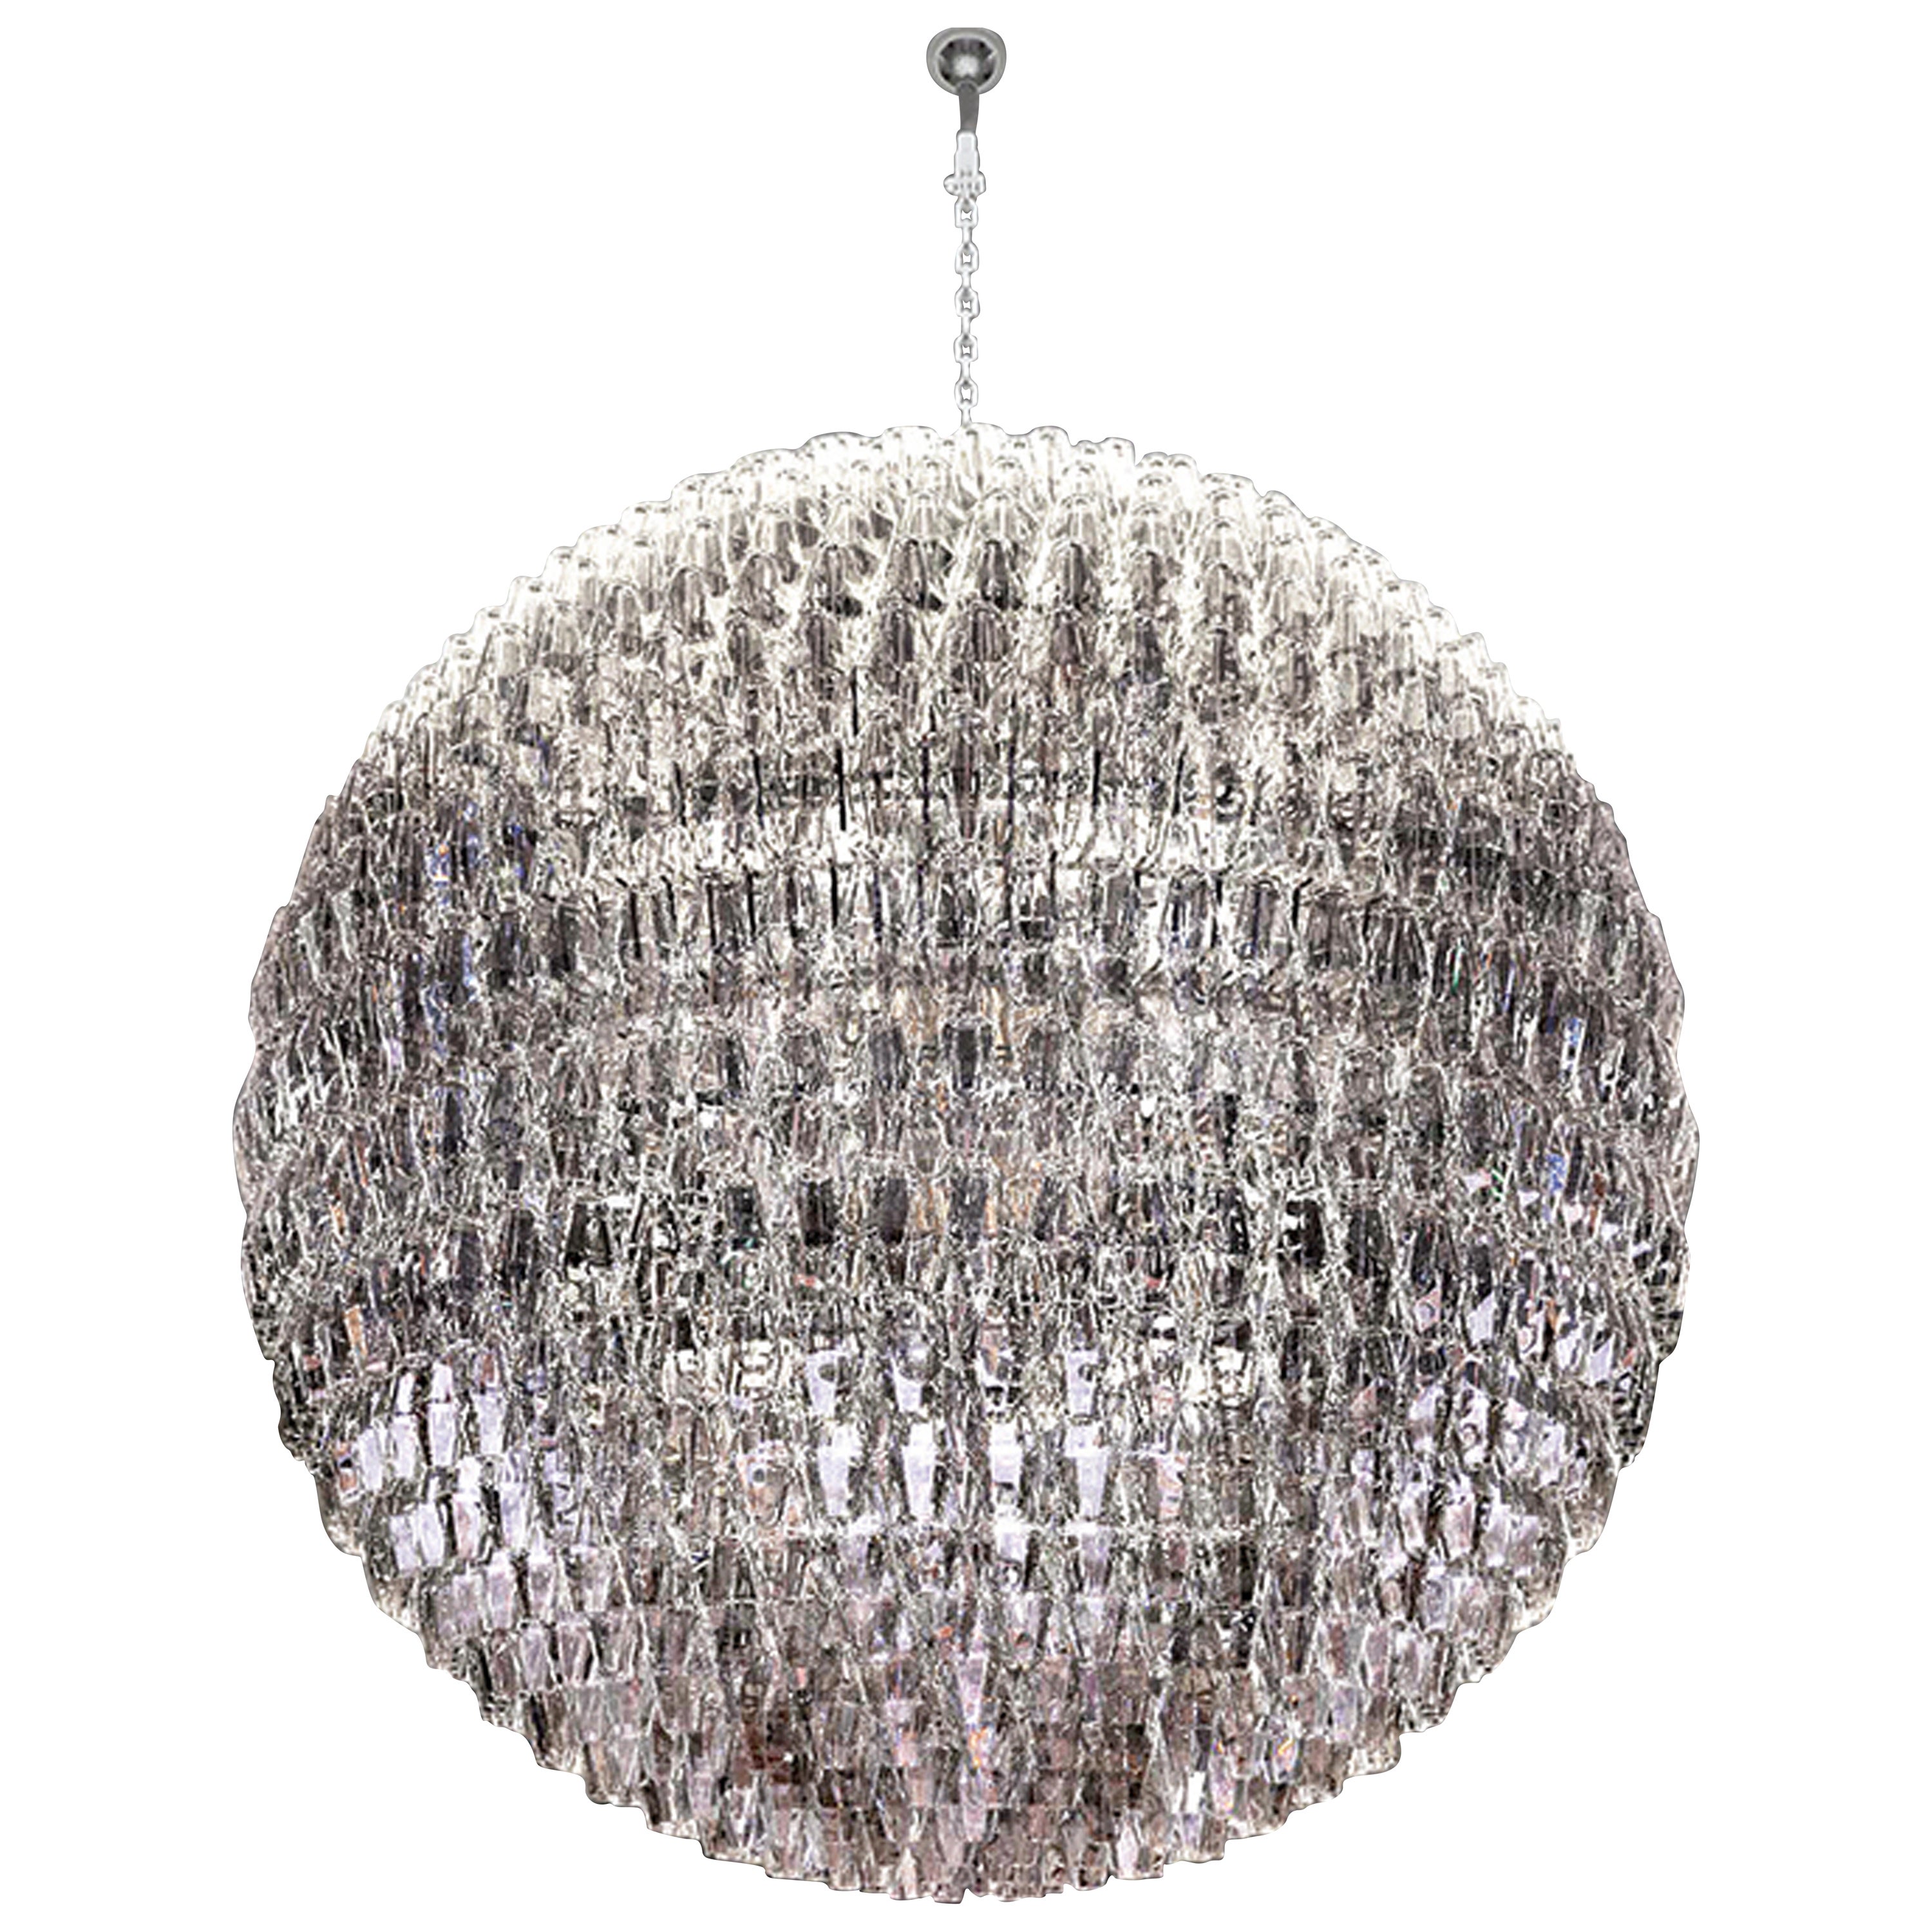 Elegant Contemporary Suspended Murano Blown Glass Crystal Chandelier by Venini   For Sale